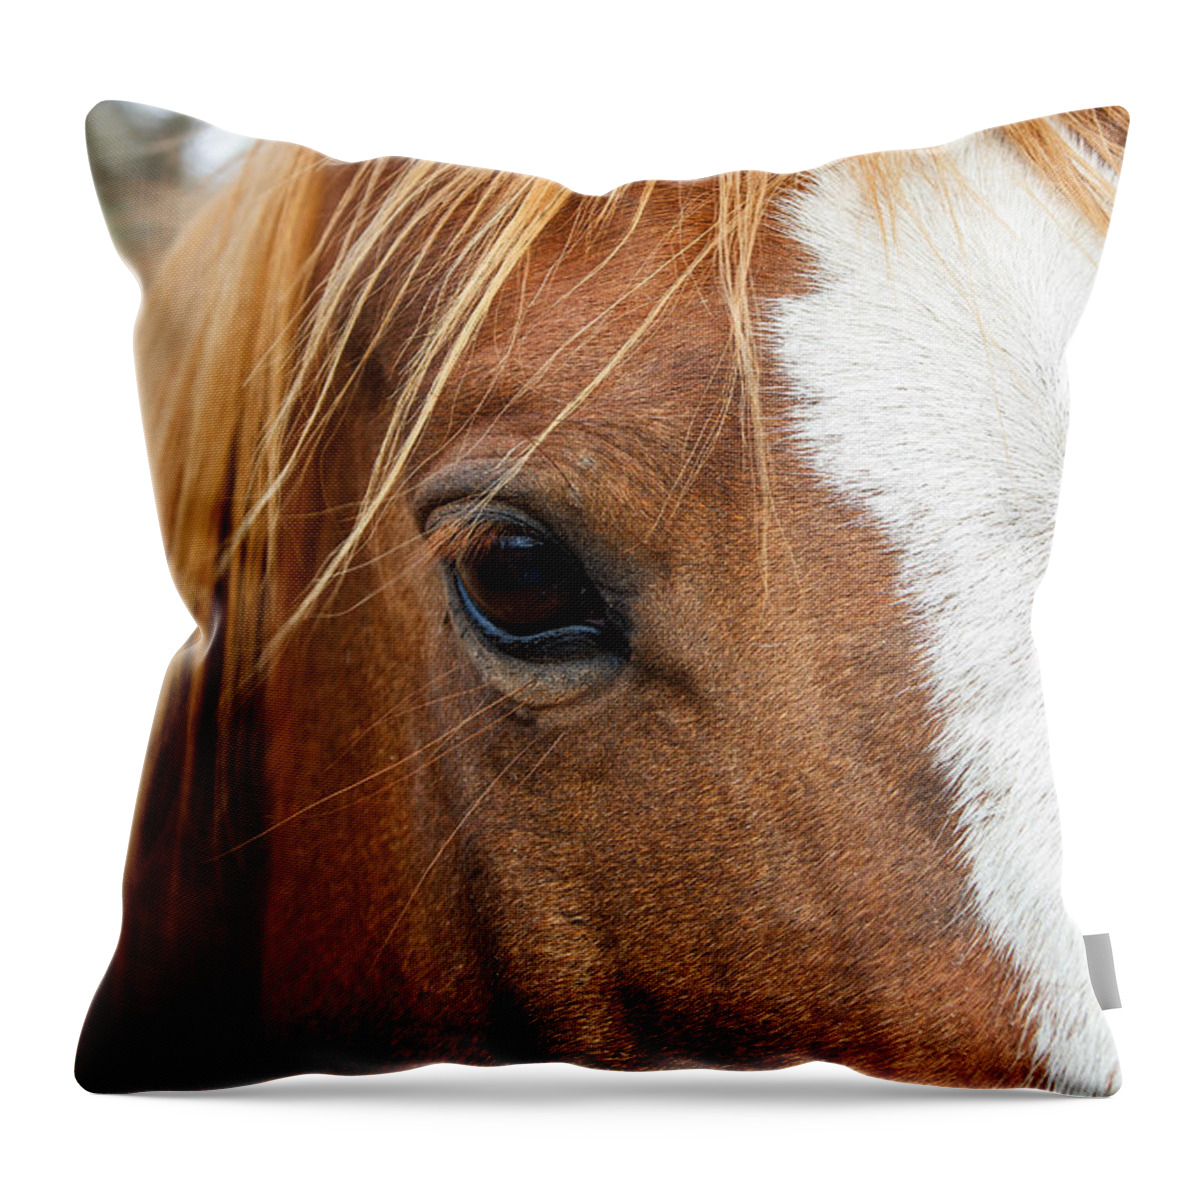 Cow Horse Throw Pillow featuring the photograph Horses Eye Print by Doug Long